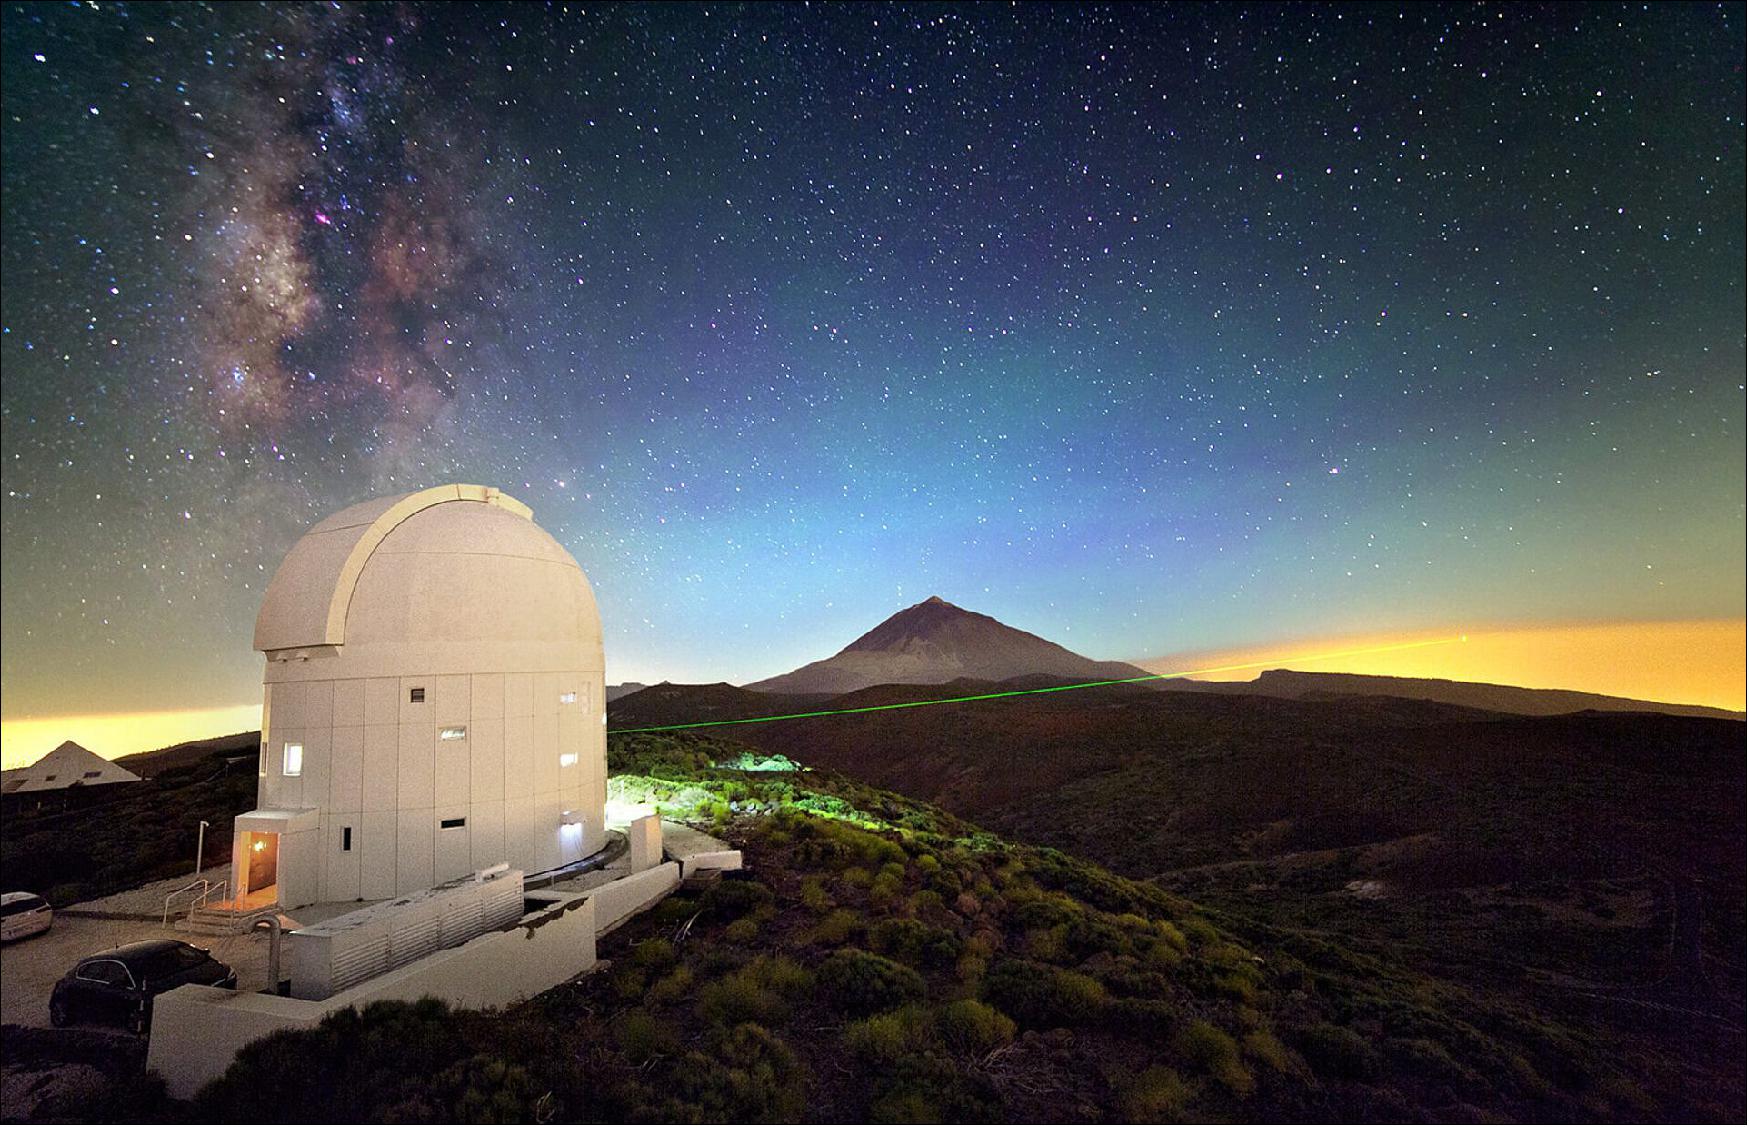 Figure 57: ESA's Optical Ground Station (OGS) is 2400 m above sea level on the volcanic island of Tenerife. Visible green laser beams are used for stabilizing the sending and receiving telescopes on the two islands. The invisible infrared single photons used for quantum teleportation are sent from the neighboring island La Palma and received by the 1 m Telescope located under the dome of the OGS. Initial experiments with entangled photons were performed in 2007, but teleportation of quantum states could only be achieved in 2012 by improving the performance of the set-up. — Aside from inter-island experiments for quantum communication and teleportation, the OGS is also used for standard laser communication with satellites, for observations of space debris or for finding new asteroids. The picture is a multiple exposure also including Tenerife's Teide volcano and the Milky Way in the background (image credit: IQOQI Vienna, Austrian Academy of Sciences)